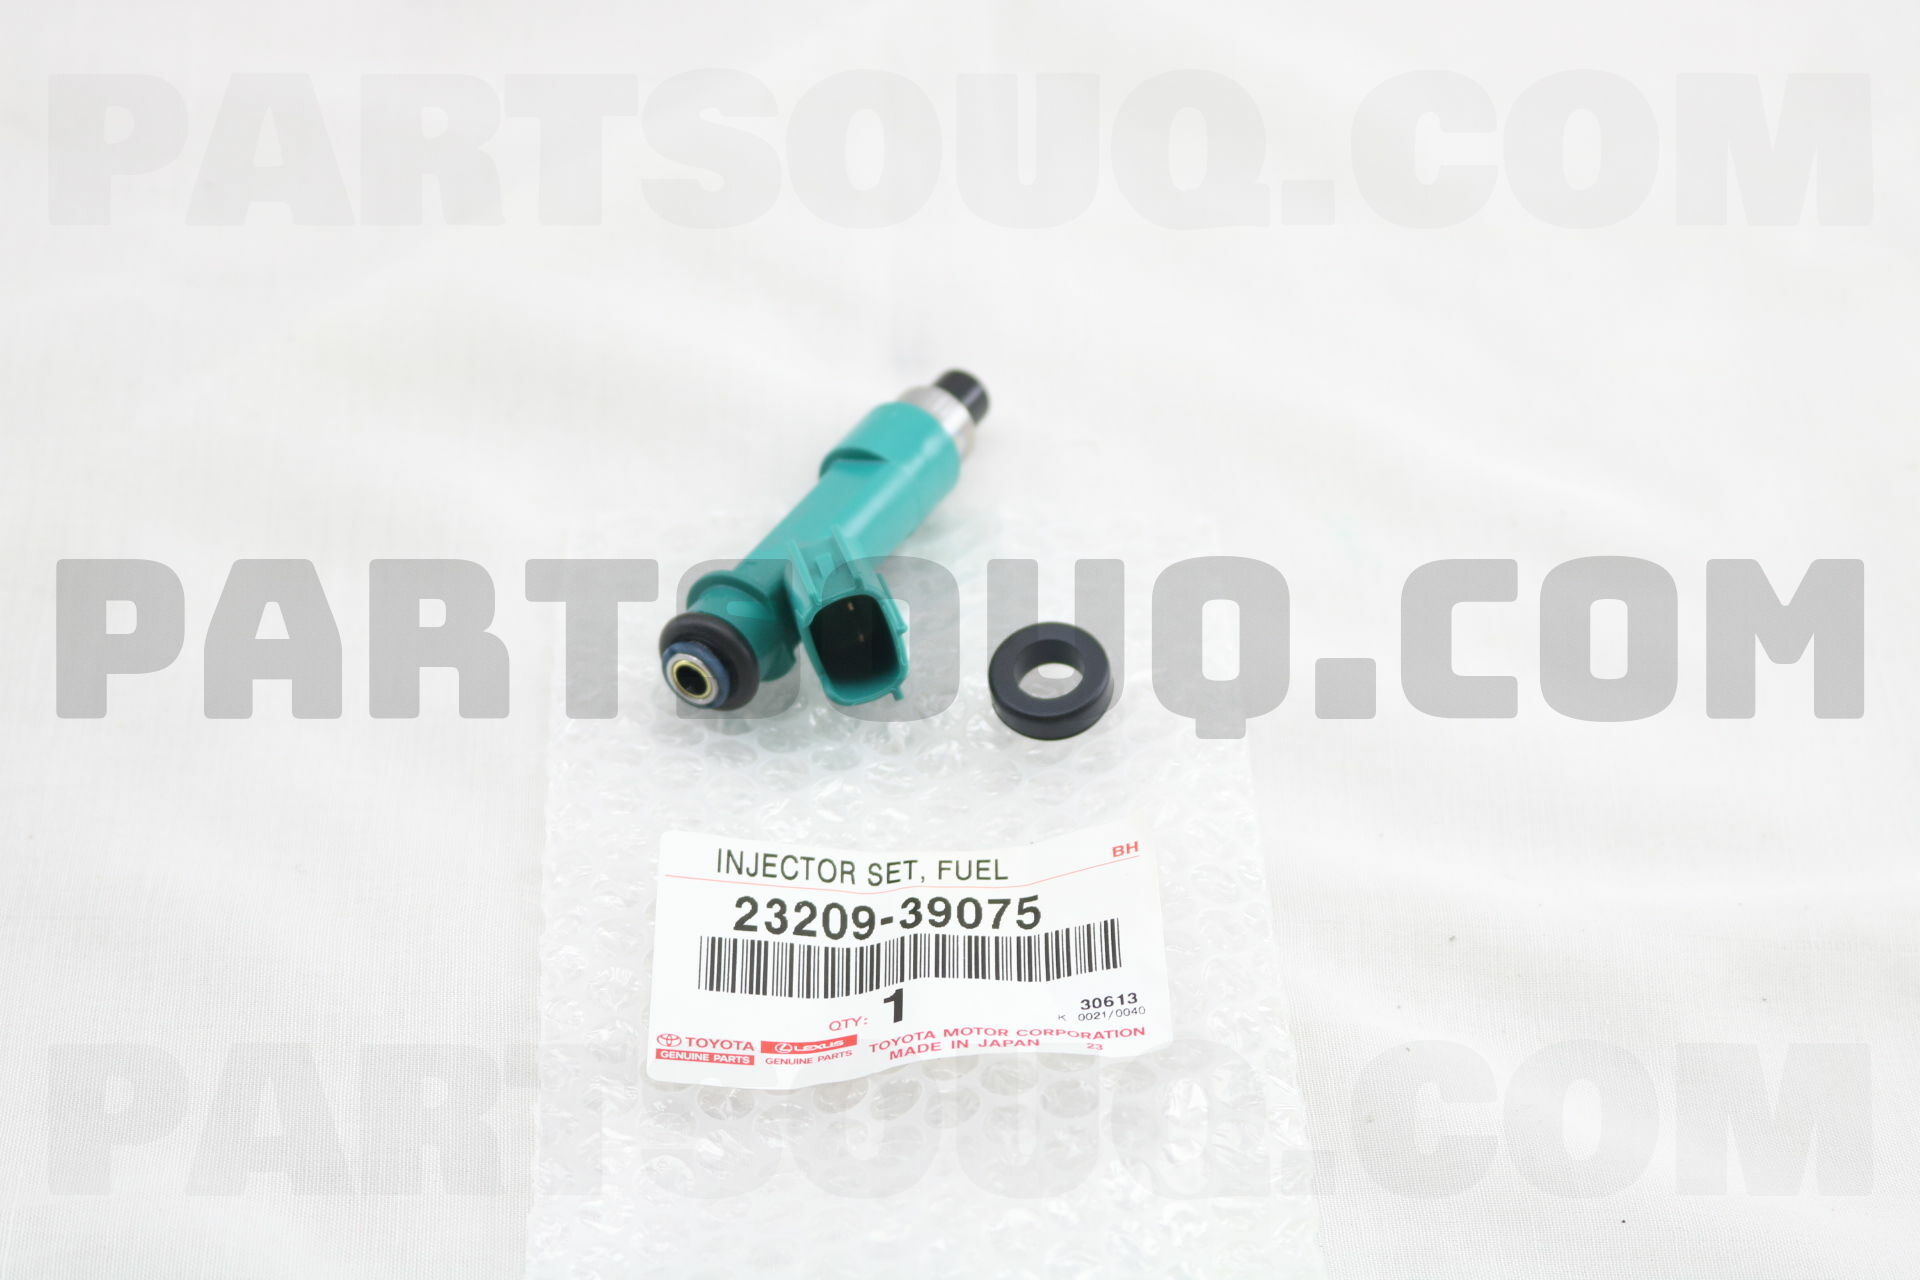 112 26. Injector ASSY, fuel(for Port). Valve ASSY, fuel Relief.